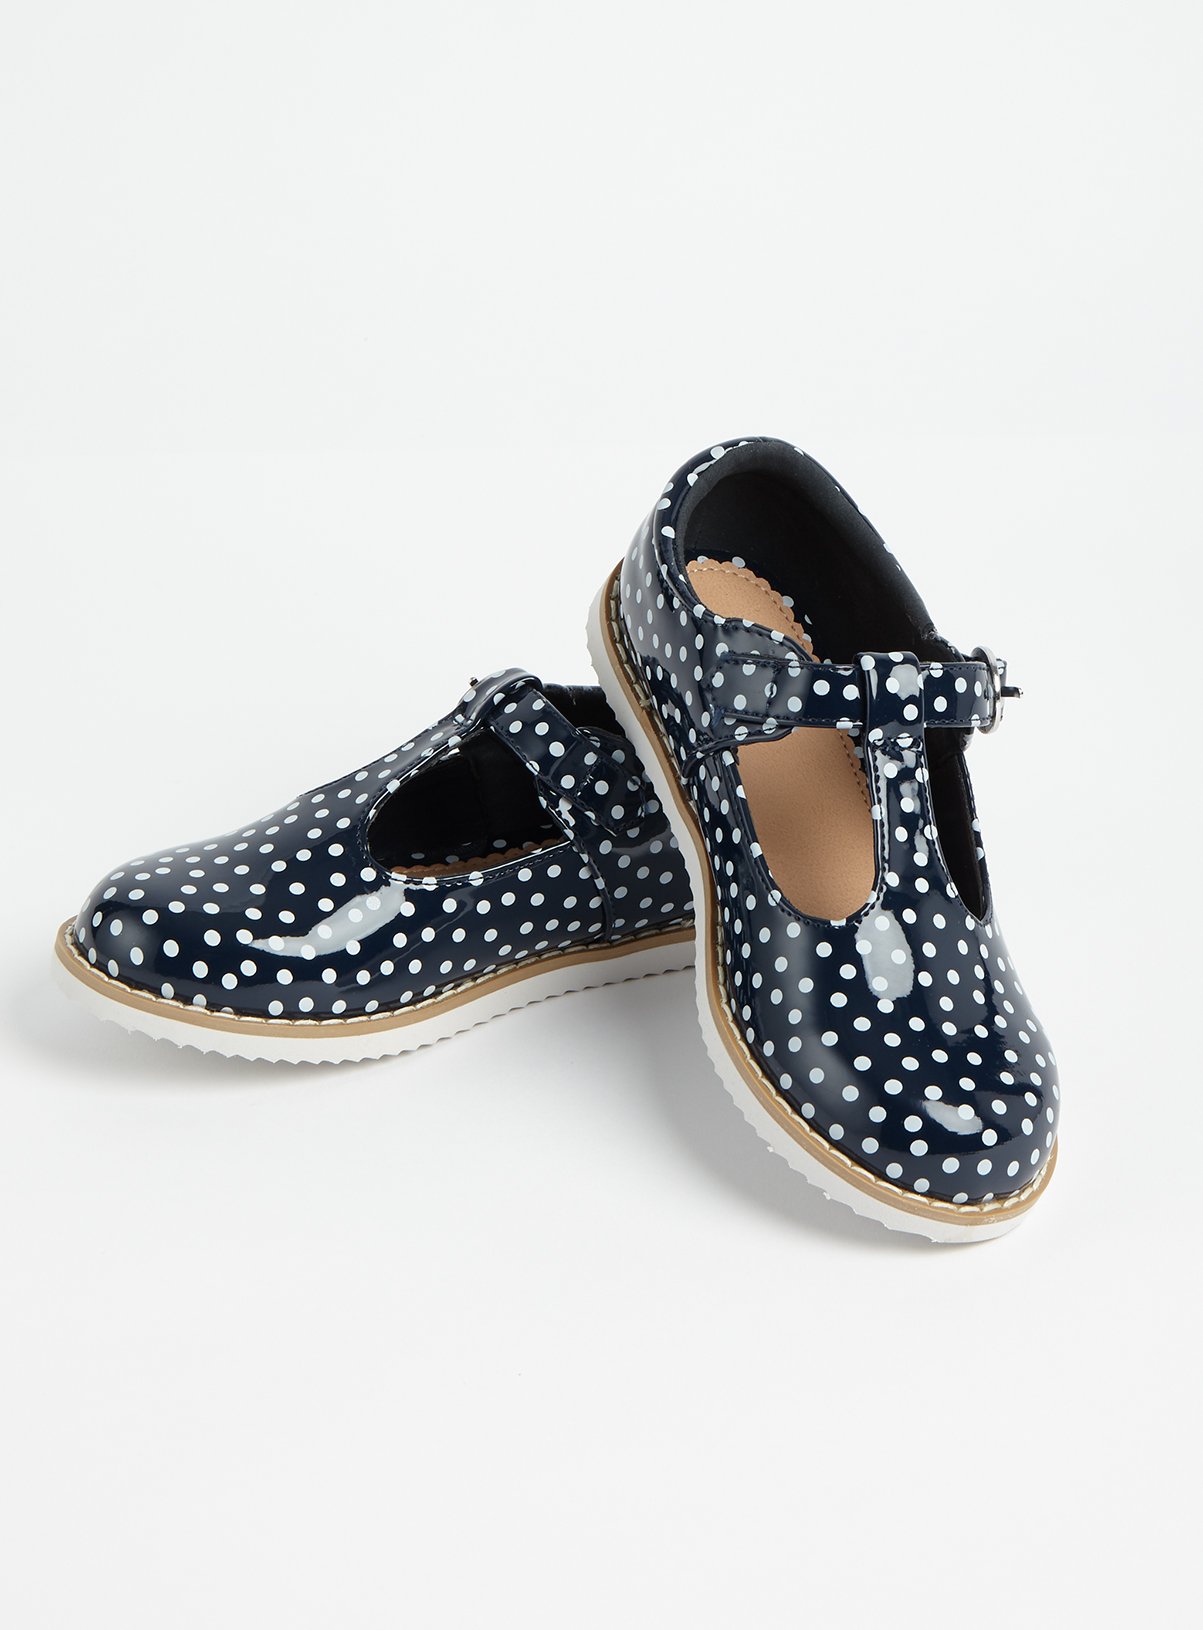 navy blue and white polka dot shoes